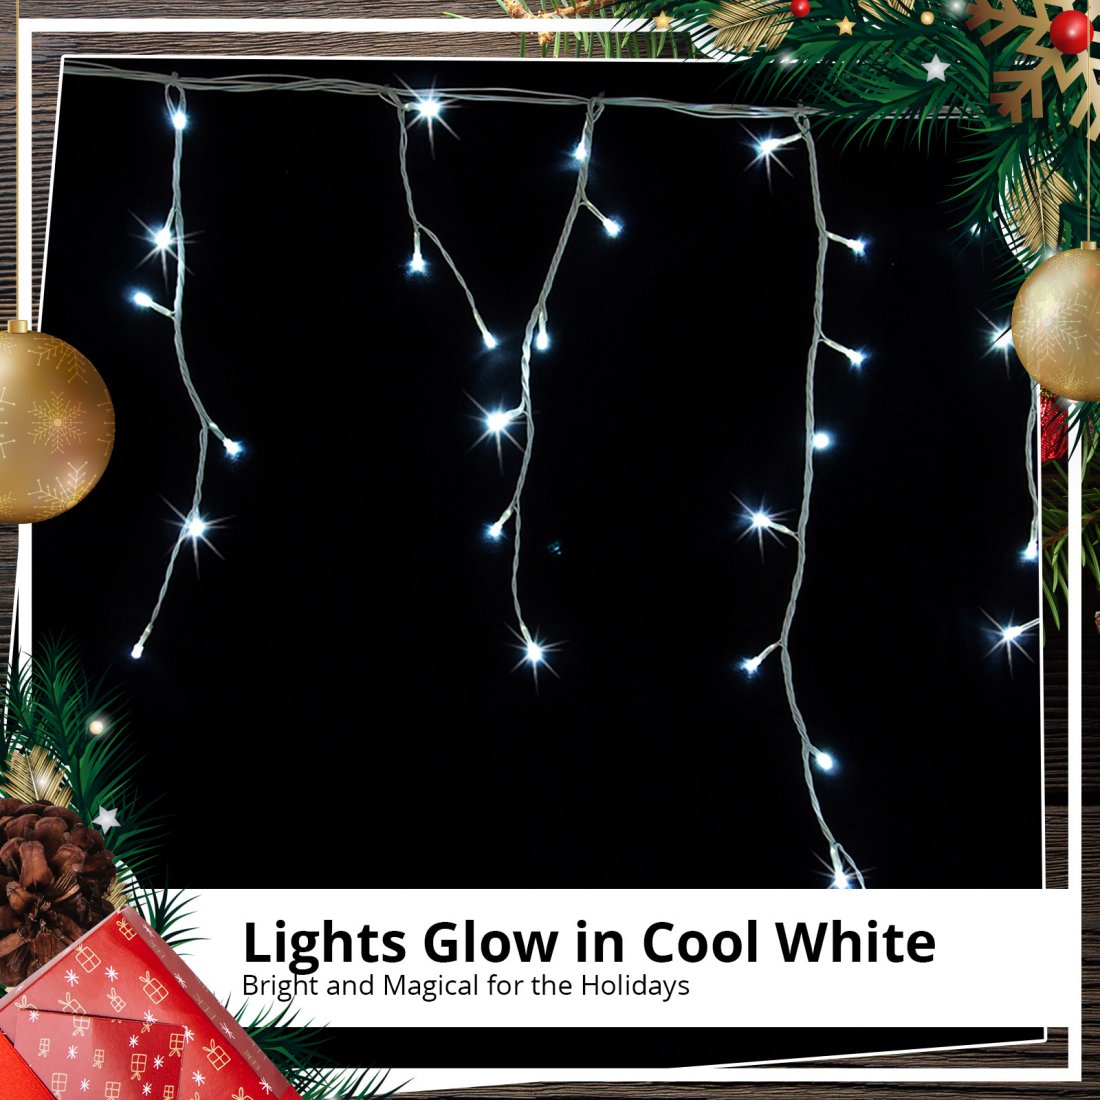 Outdoor 960 LED Snowing Icicle White Christmas Light Display with Timer